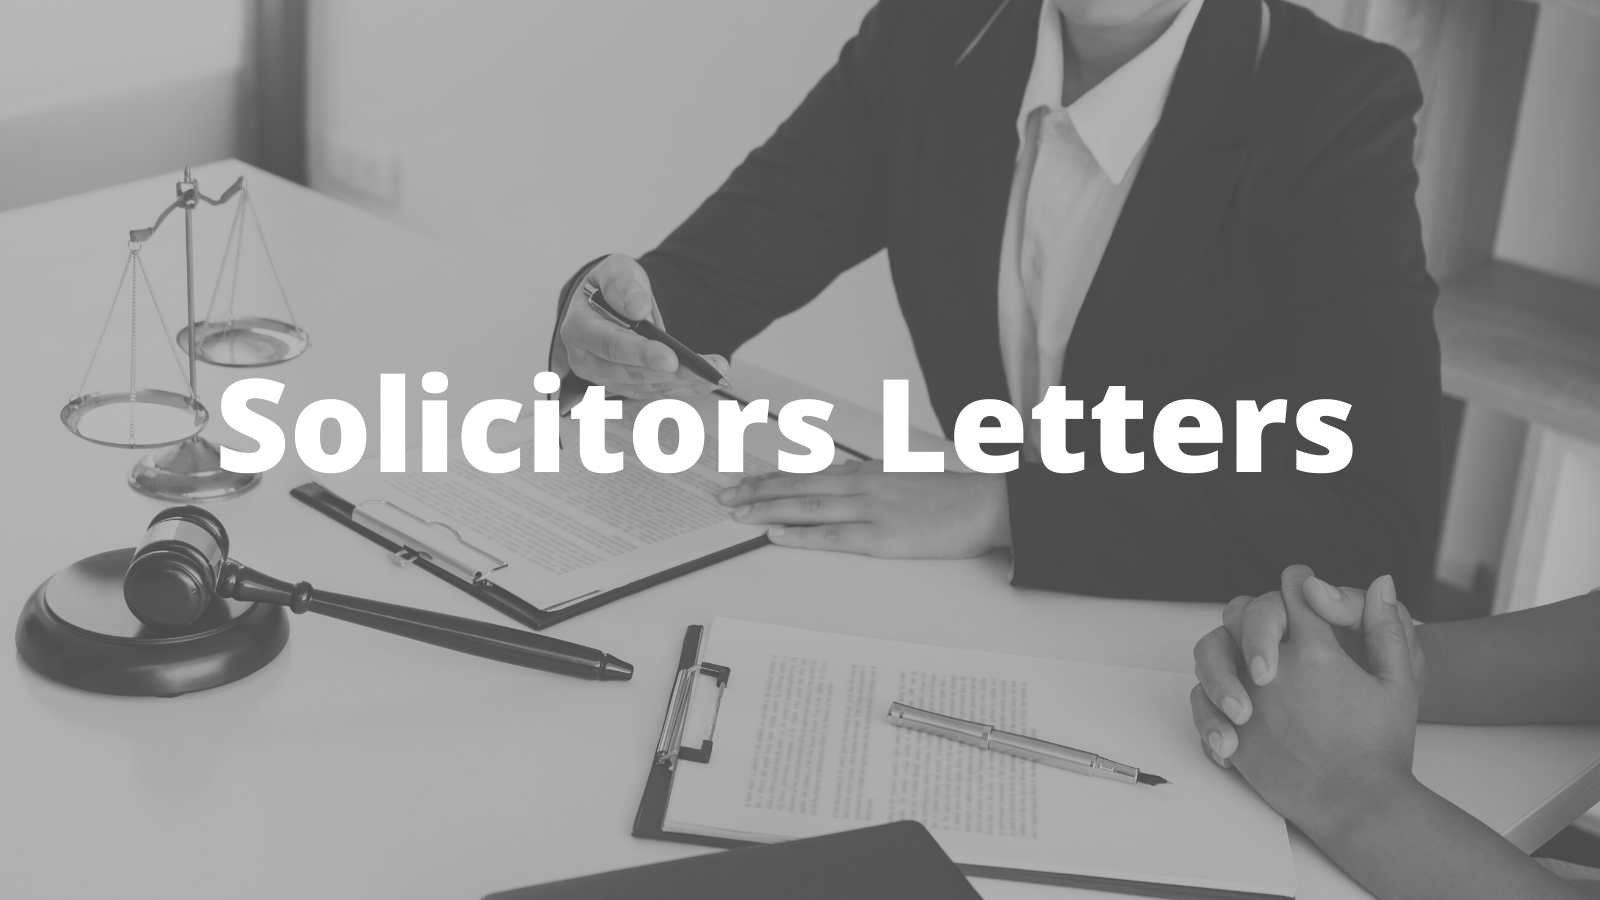 narcissists letters from solicitor